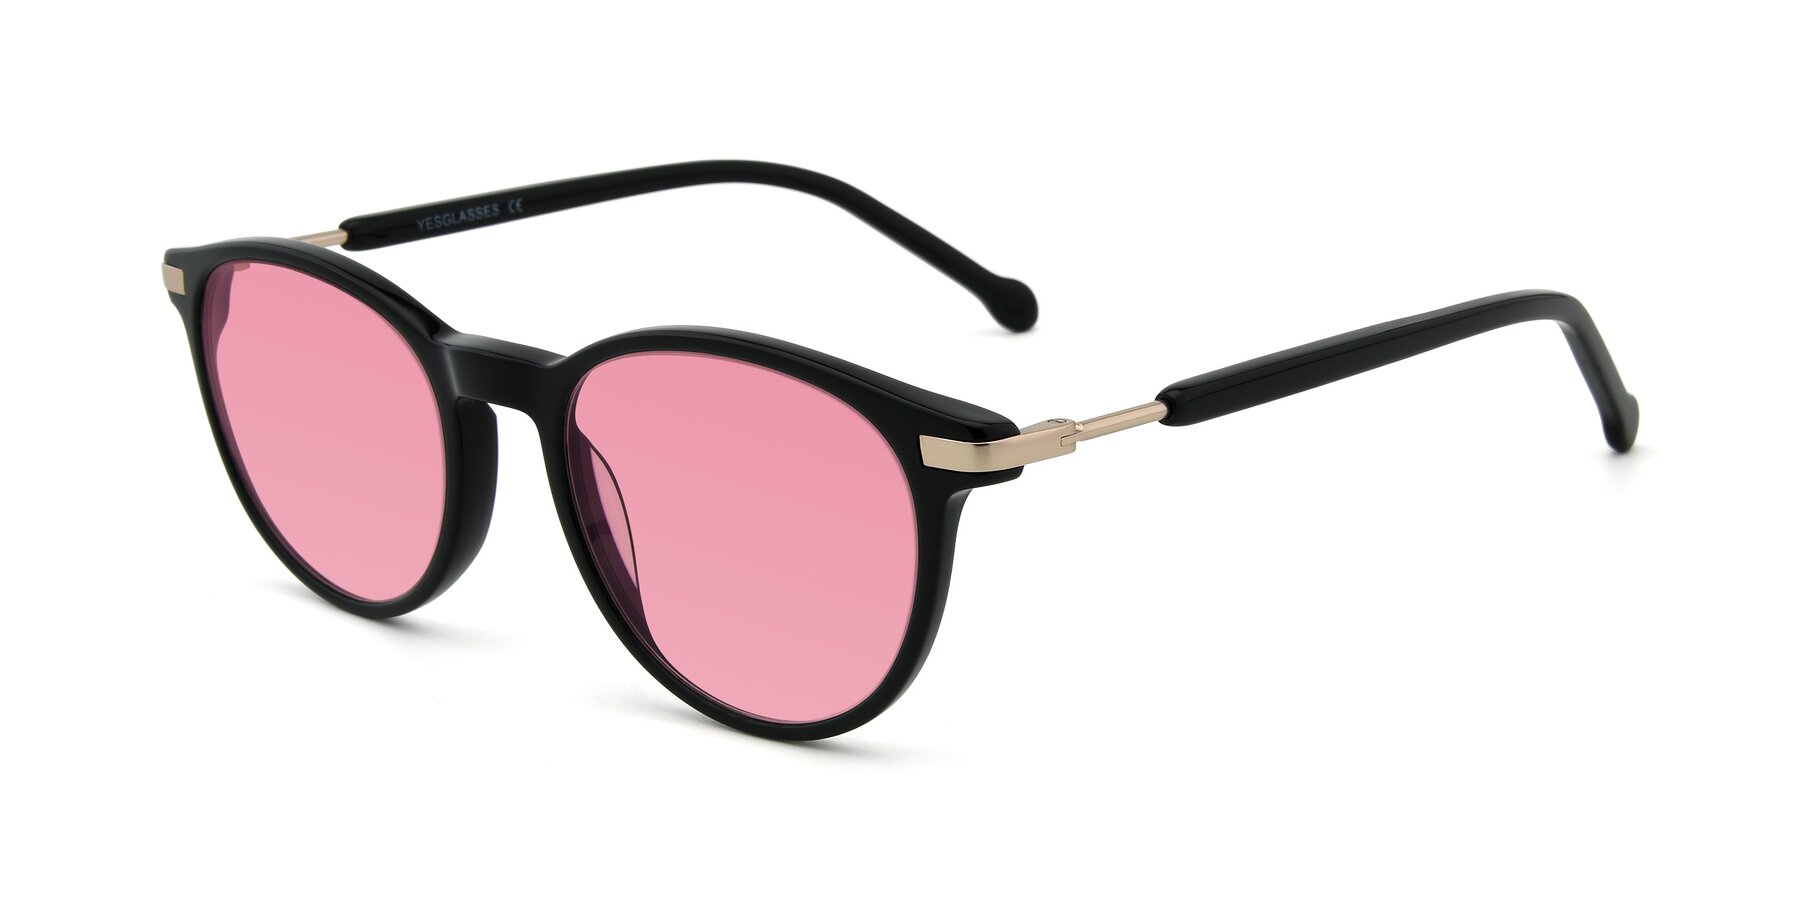 Angle of 17429 in Black with Pink Tinted Lenses